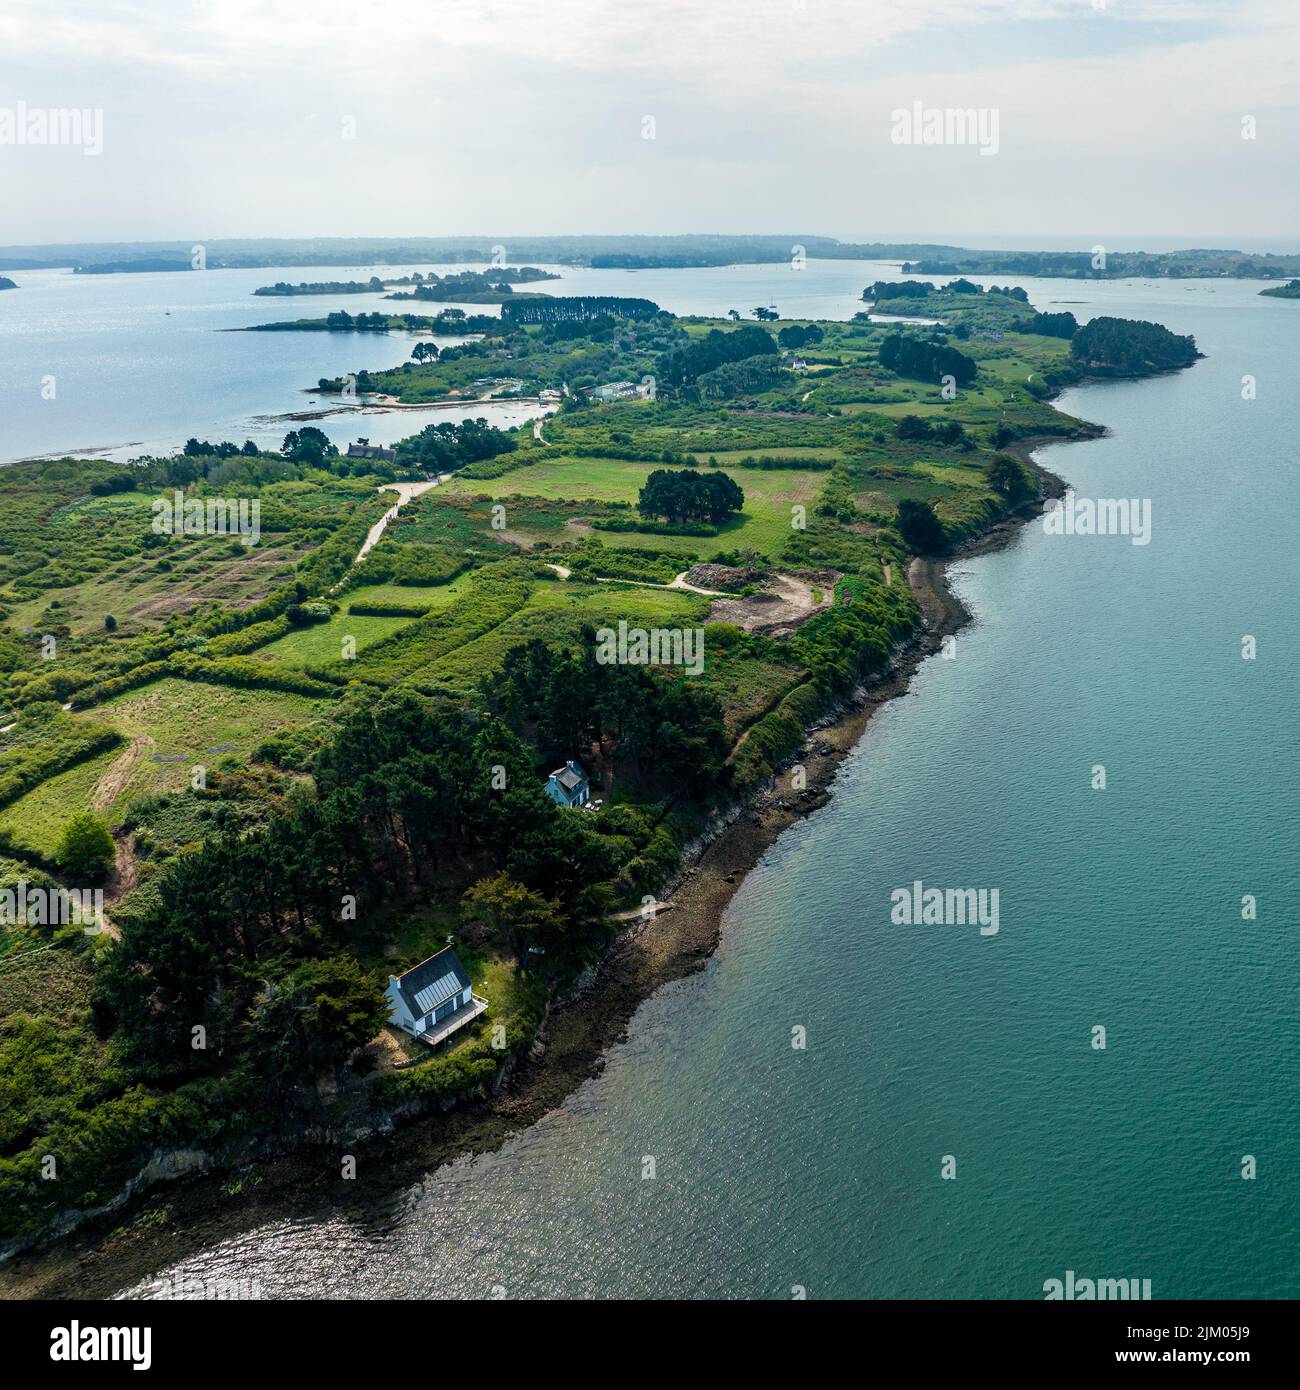 An aerial view of the beautiful islands of Ile-aux-Moines in Bretagne, France covered in lush greenery Stock Photo